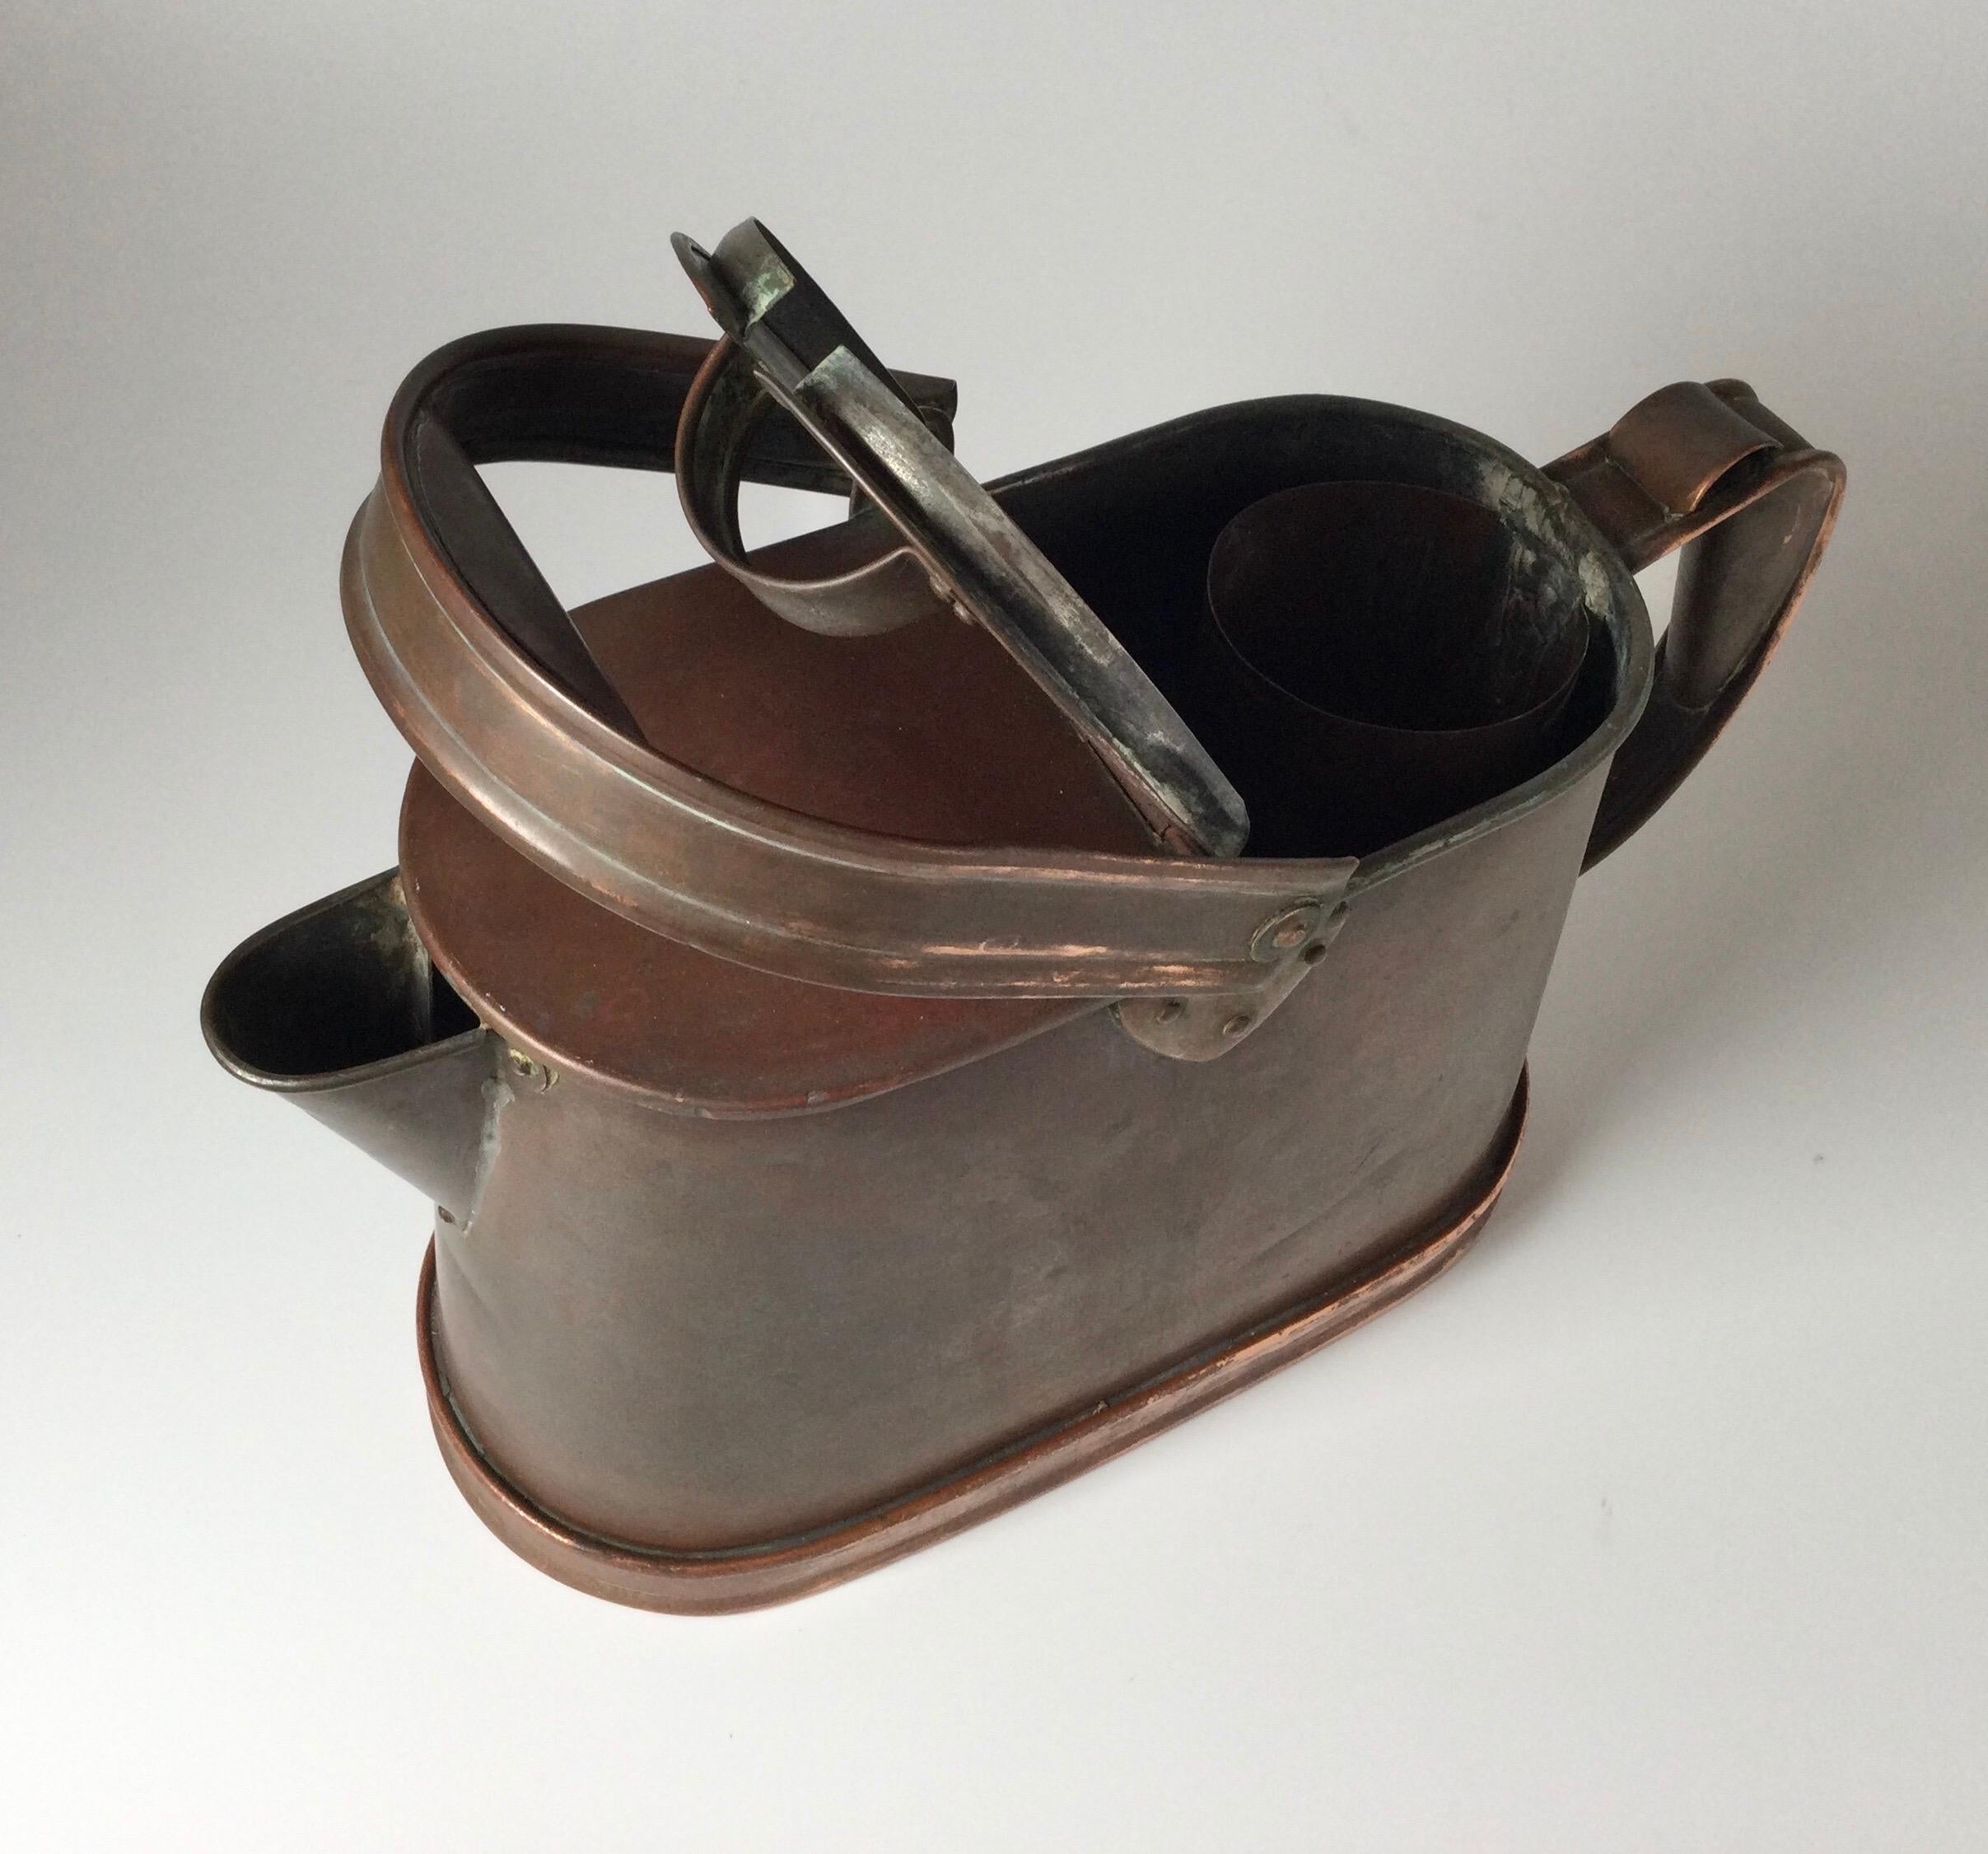 This classic style English watering can has a flower holder under the lid, making it a perfect tool for watering and cutting garden flowers. The copper has aged to a beautiful patina. This is an especially nice piece! Measures: 8” tall by 10” long